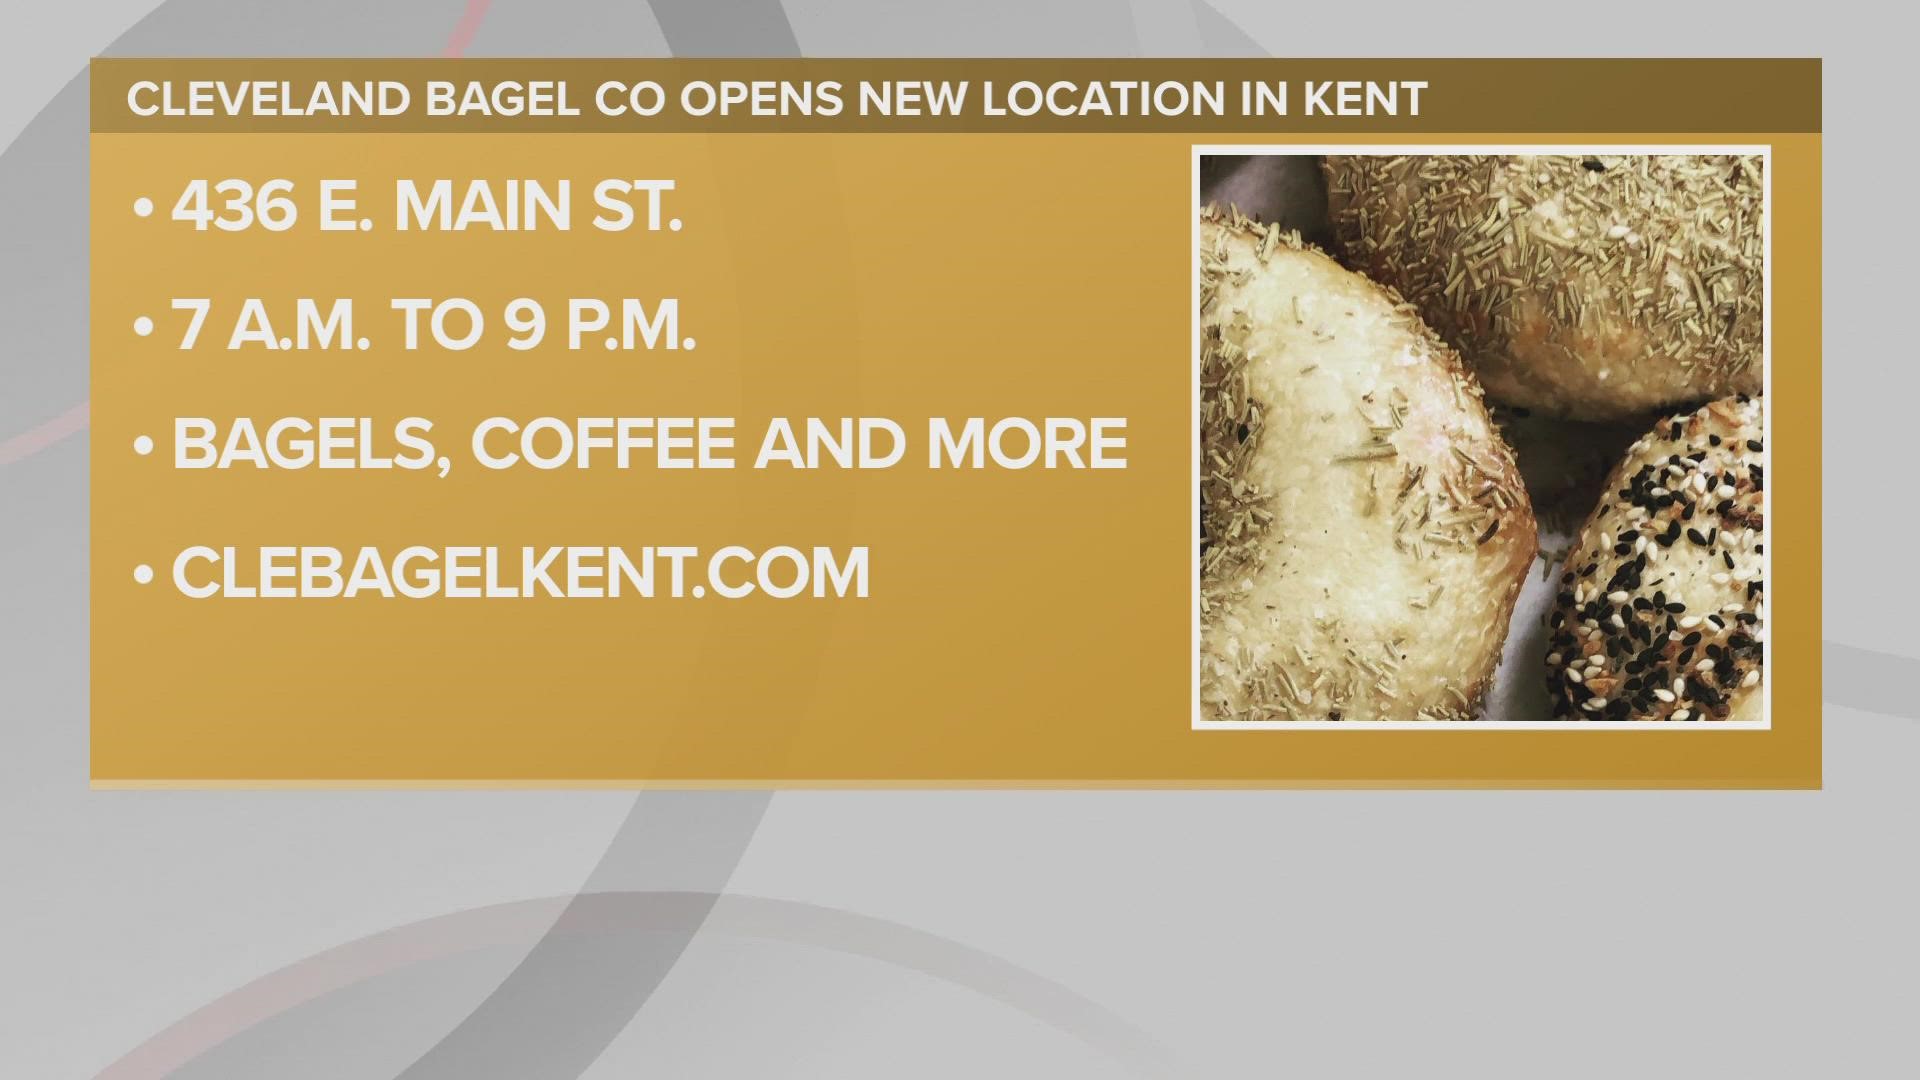 3News' Kierra Cotton visited the brand new Cleveland Bagel Company location on the campus of Kent State University.